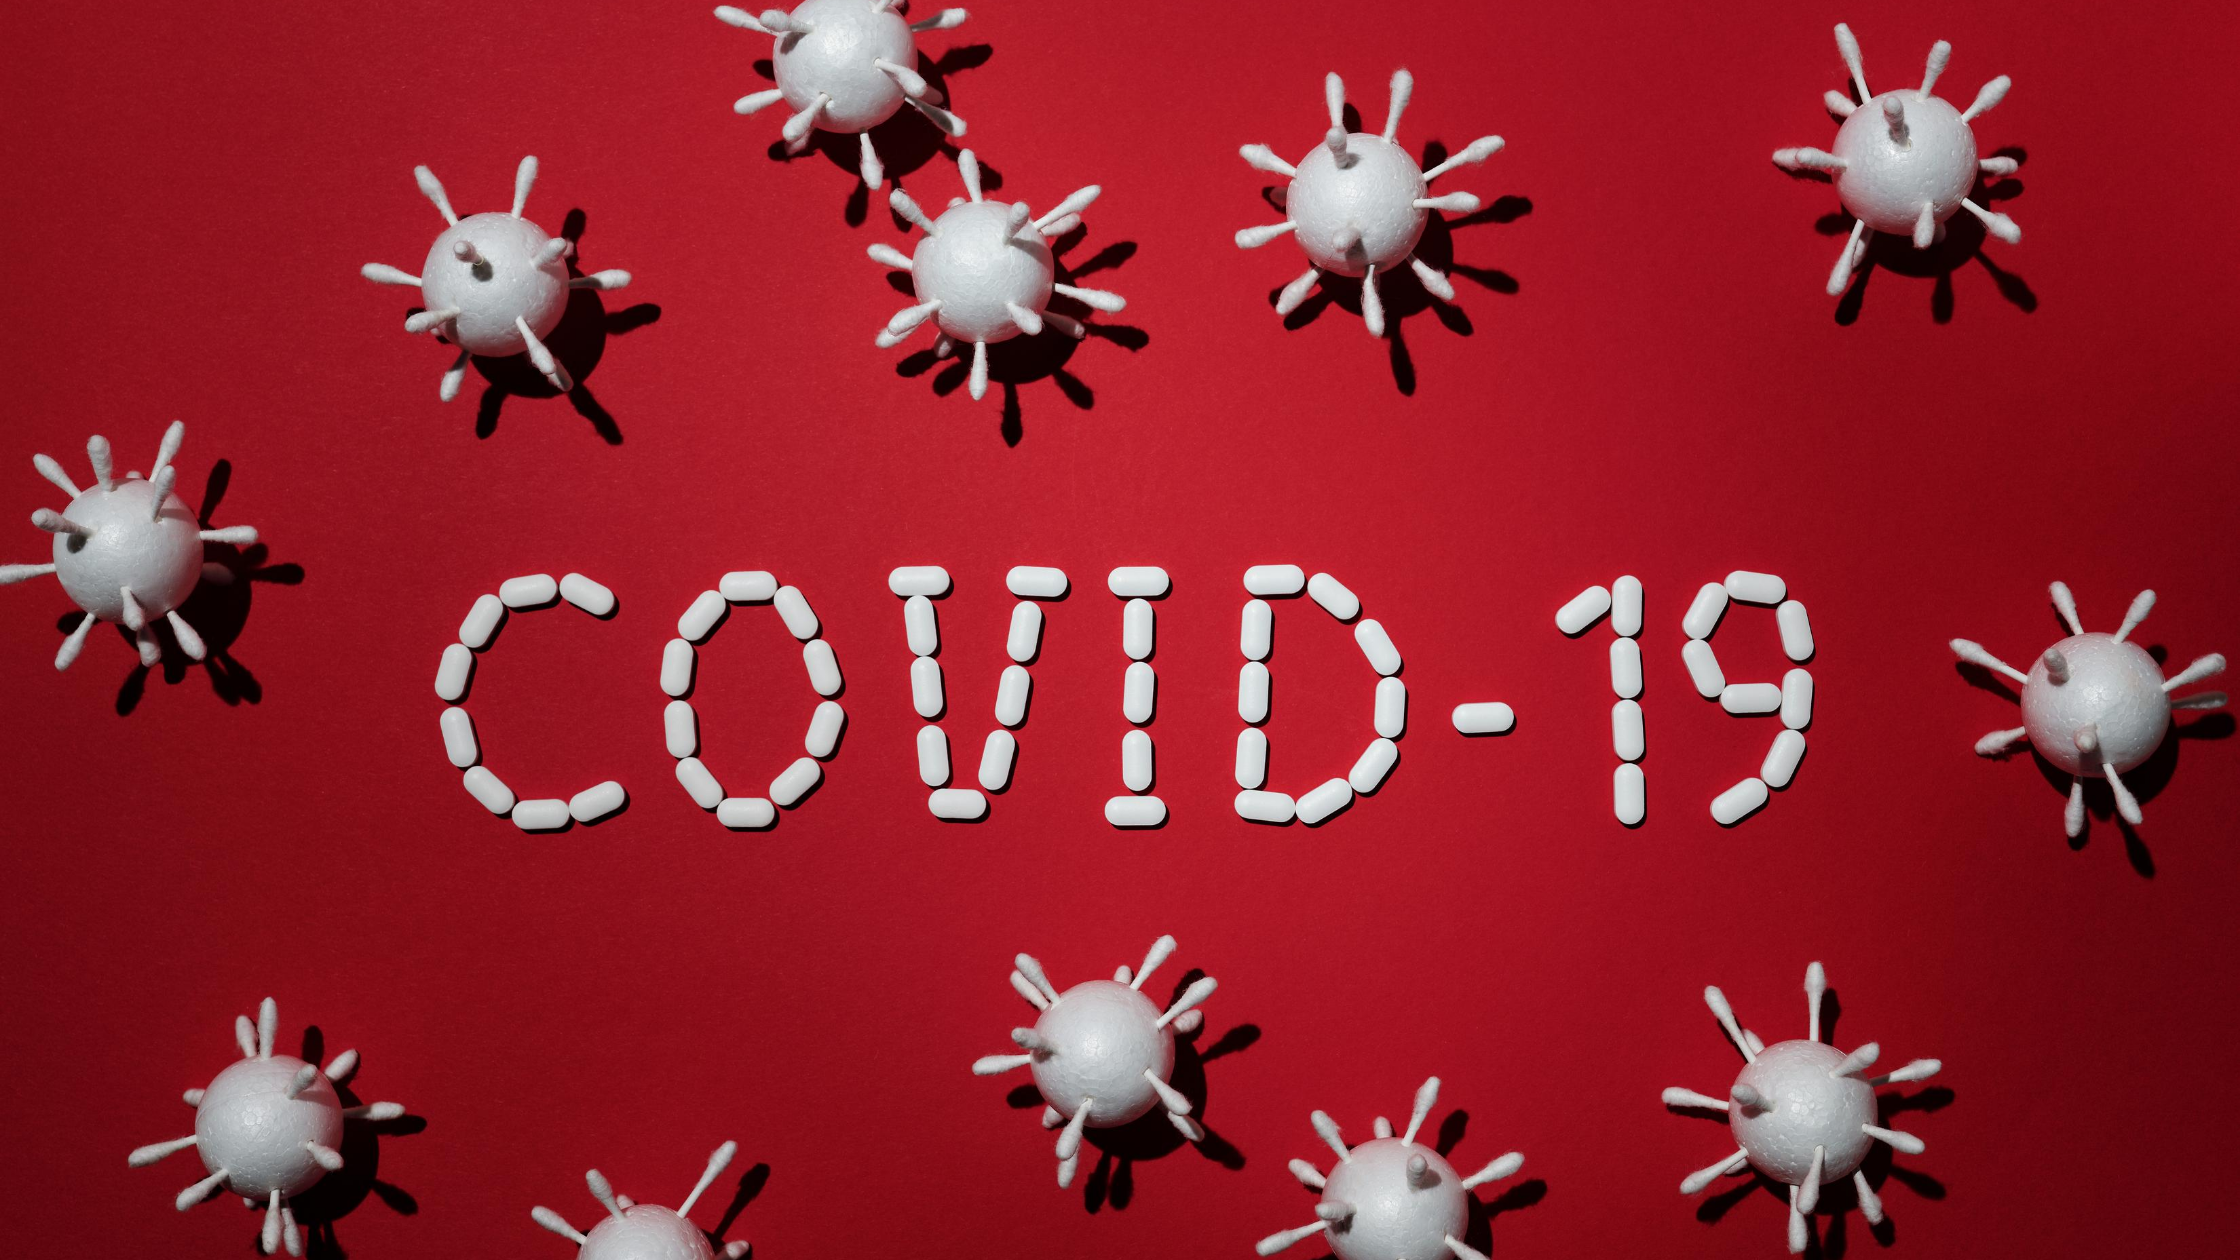 Major events are going virtual as the coronavirus pandemic breeds uncertainty